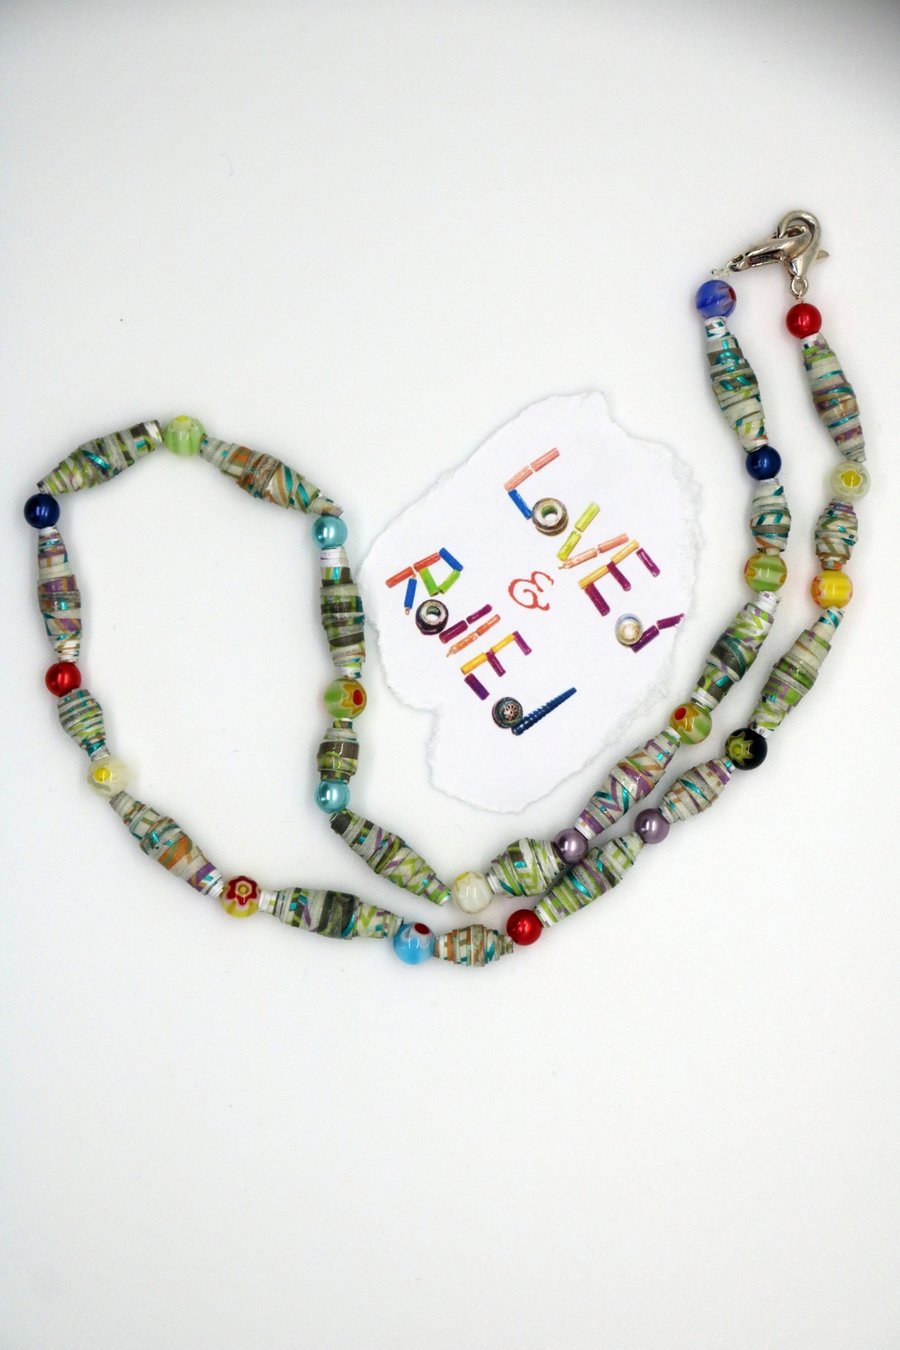 Multicoloured paper beads necklace